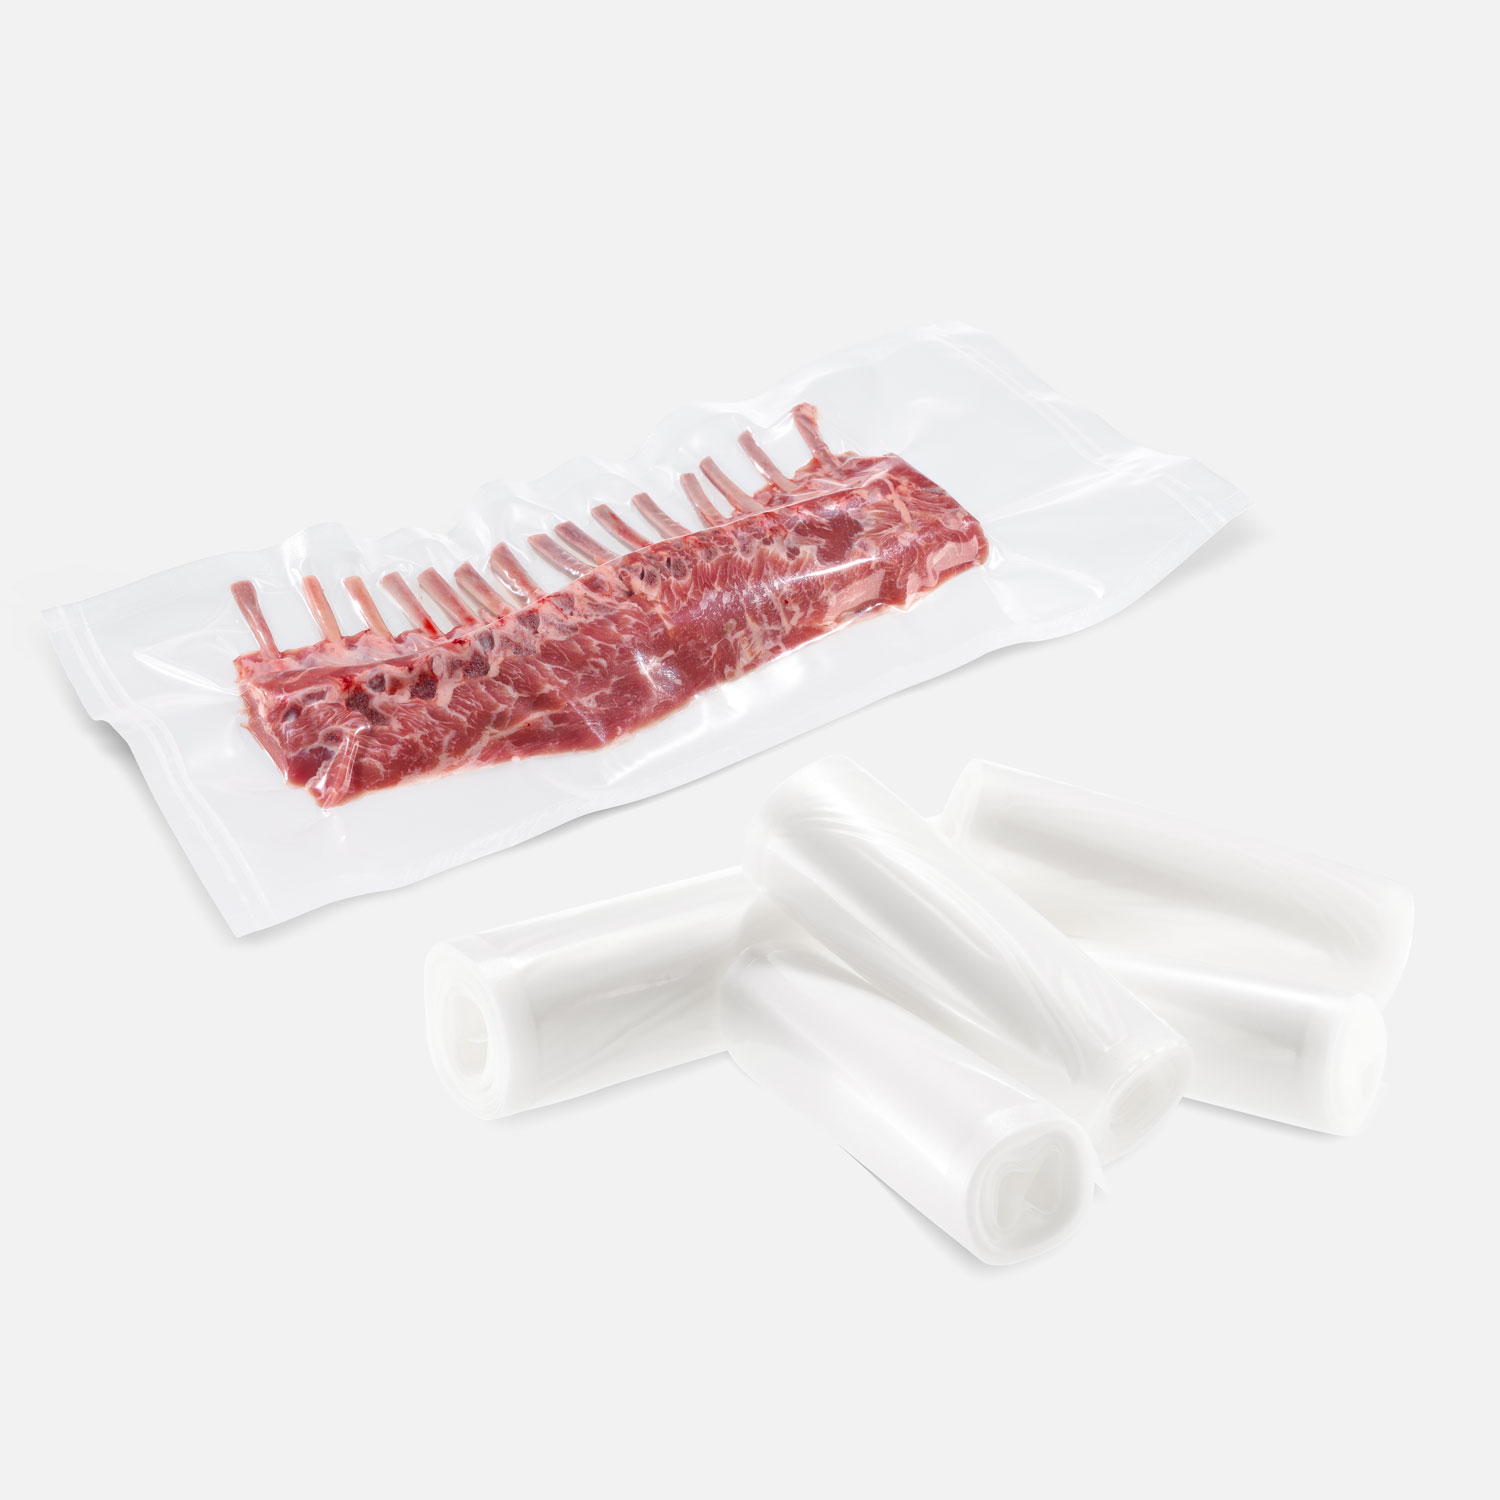 Strong structured vacuum roll vacuum-sealed with lamb rack